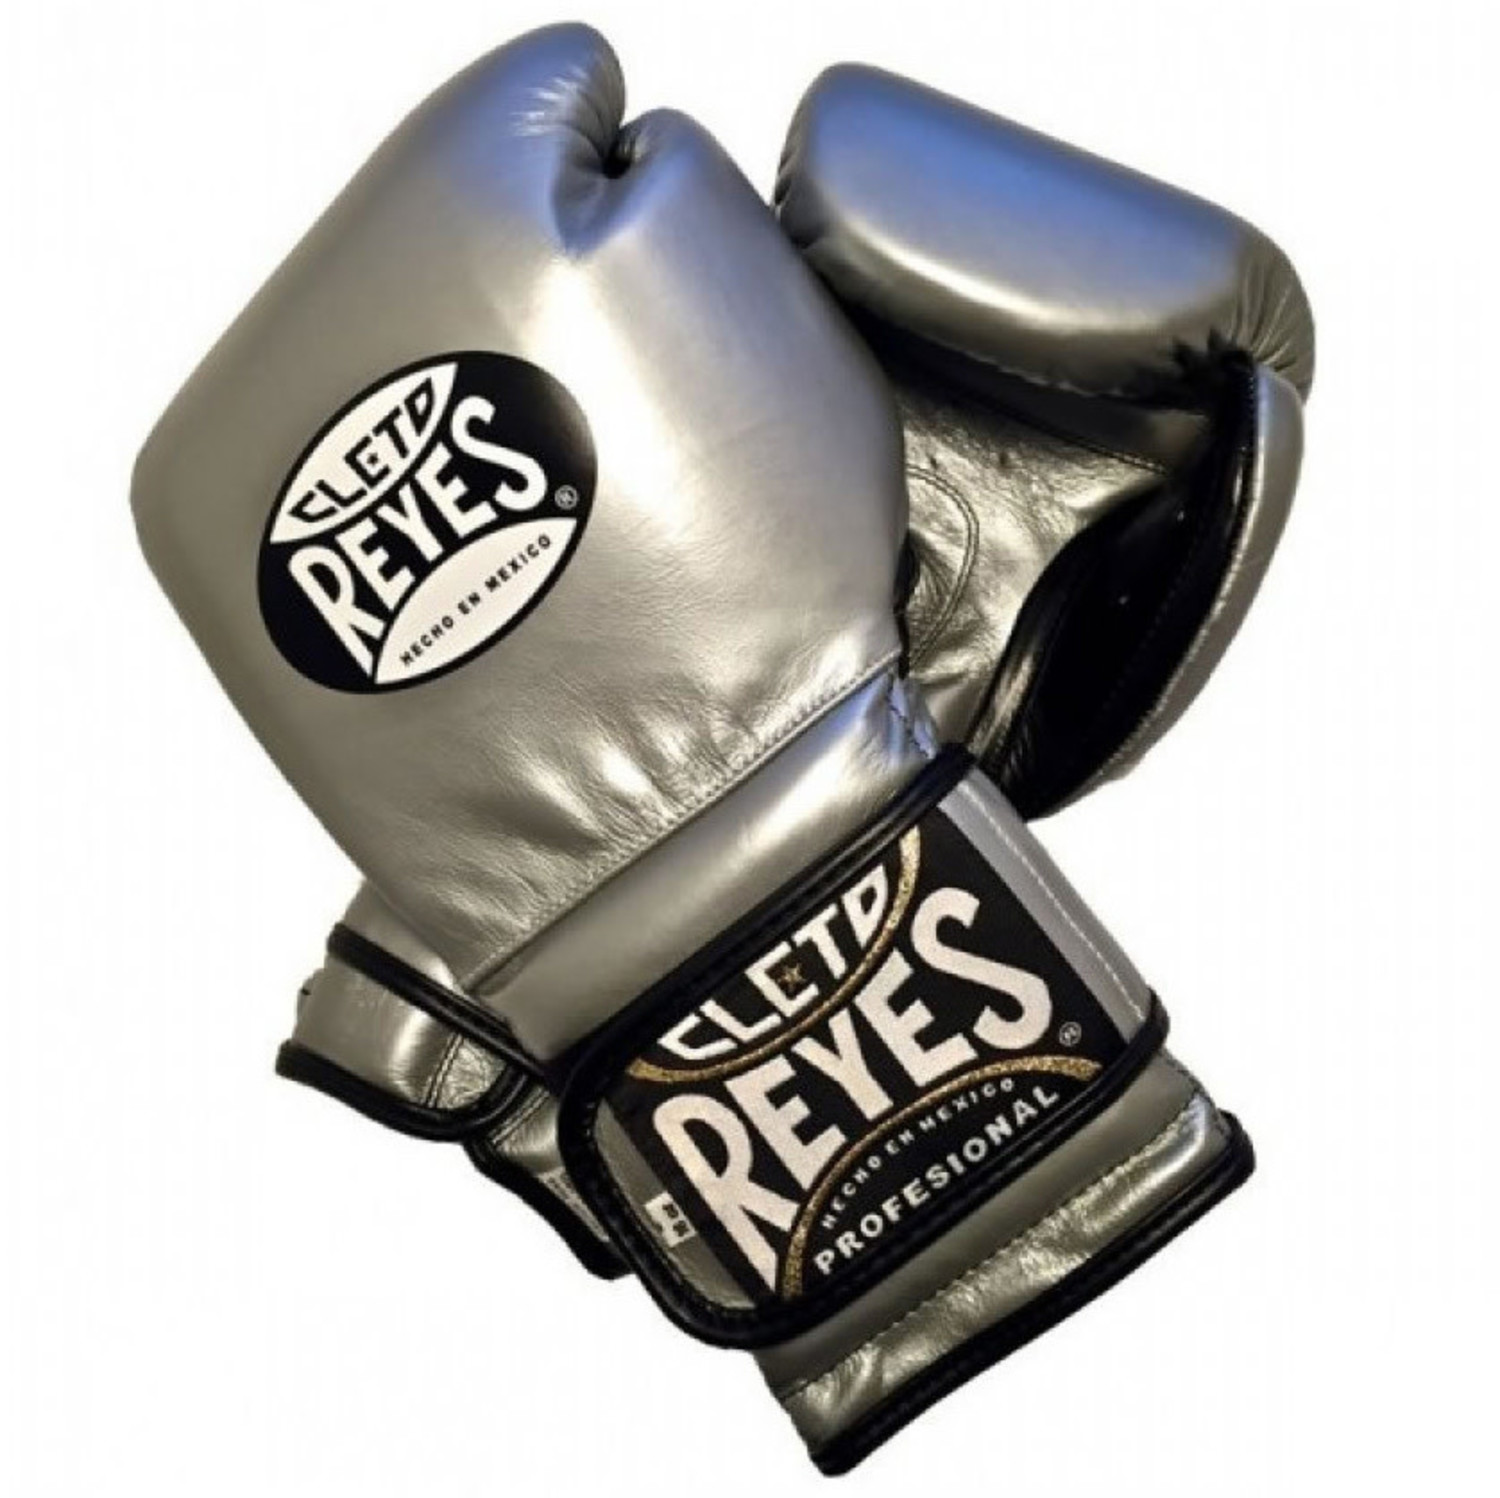 CLETO REYES PROFESSIONAL BOXING GLOVES – FIGHT 2 FINISH